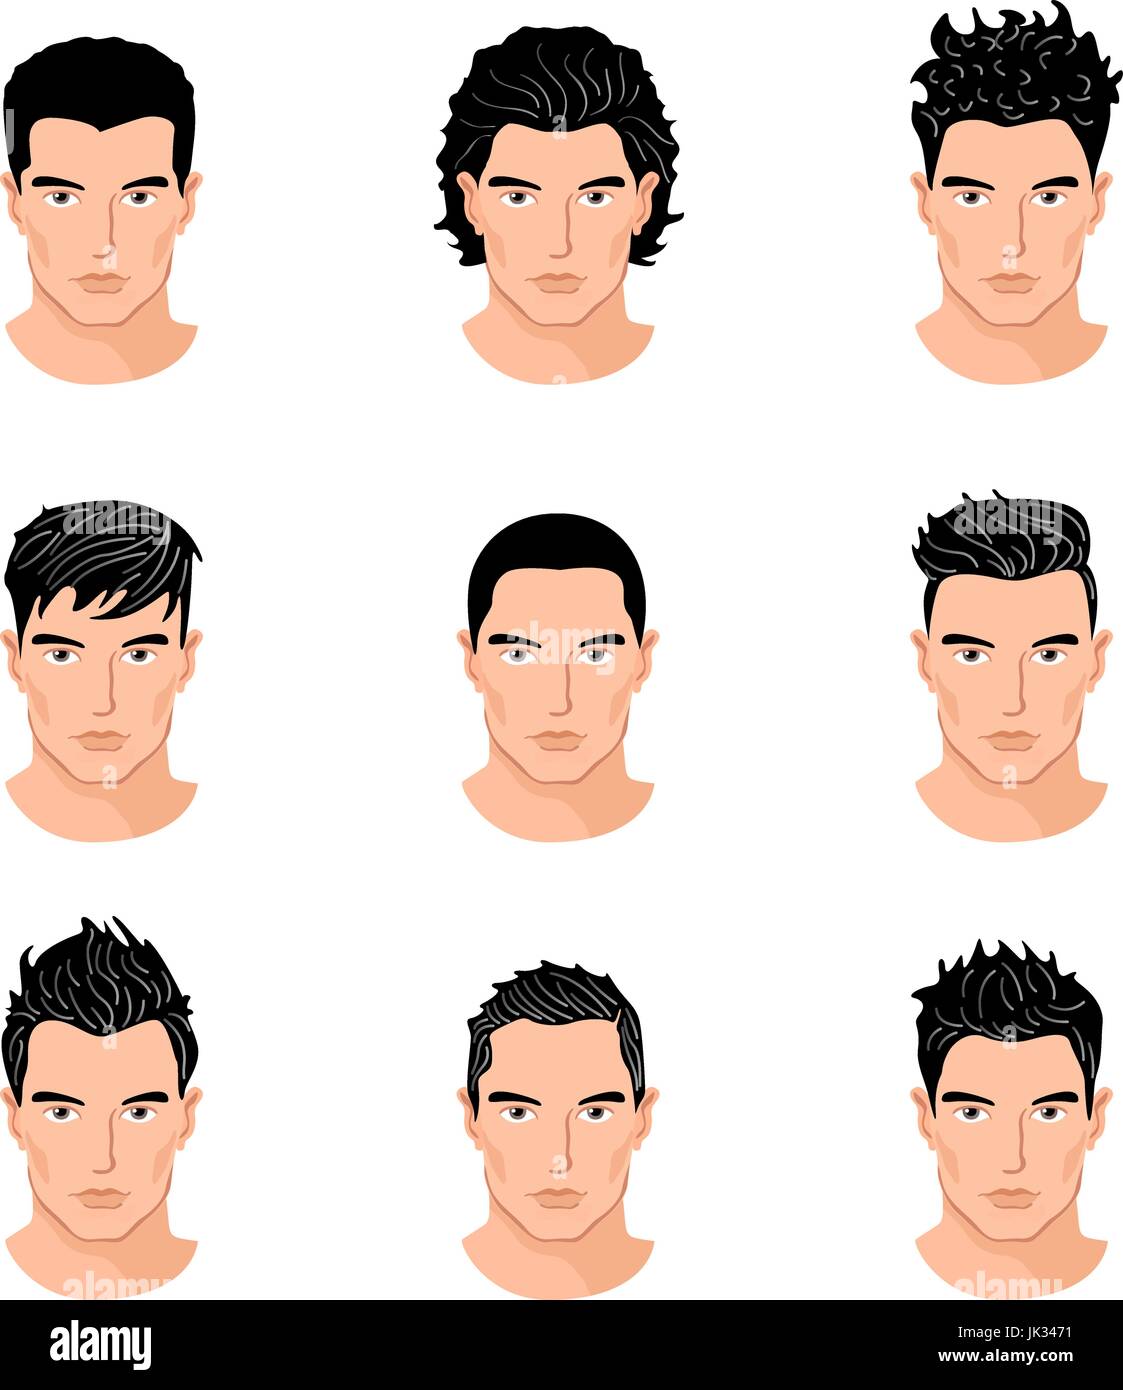 Hairstyles For Young Men